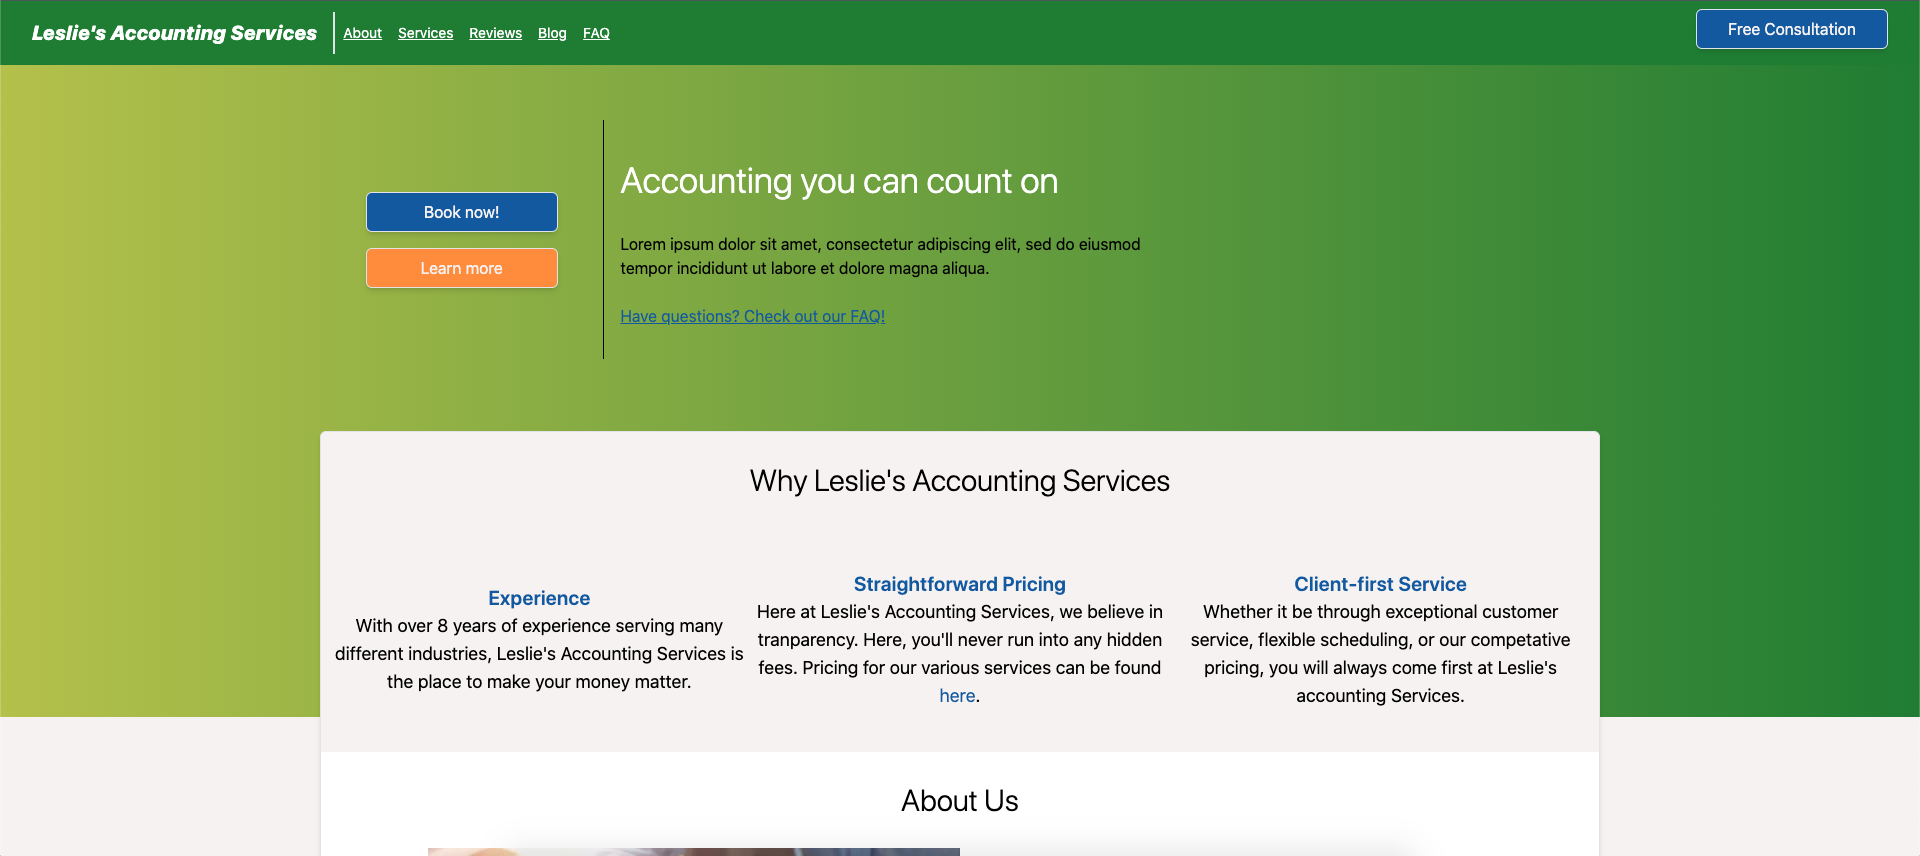 Image for Leslie's Accounting Services